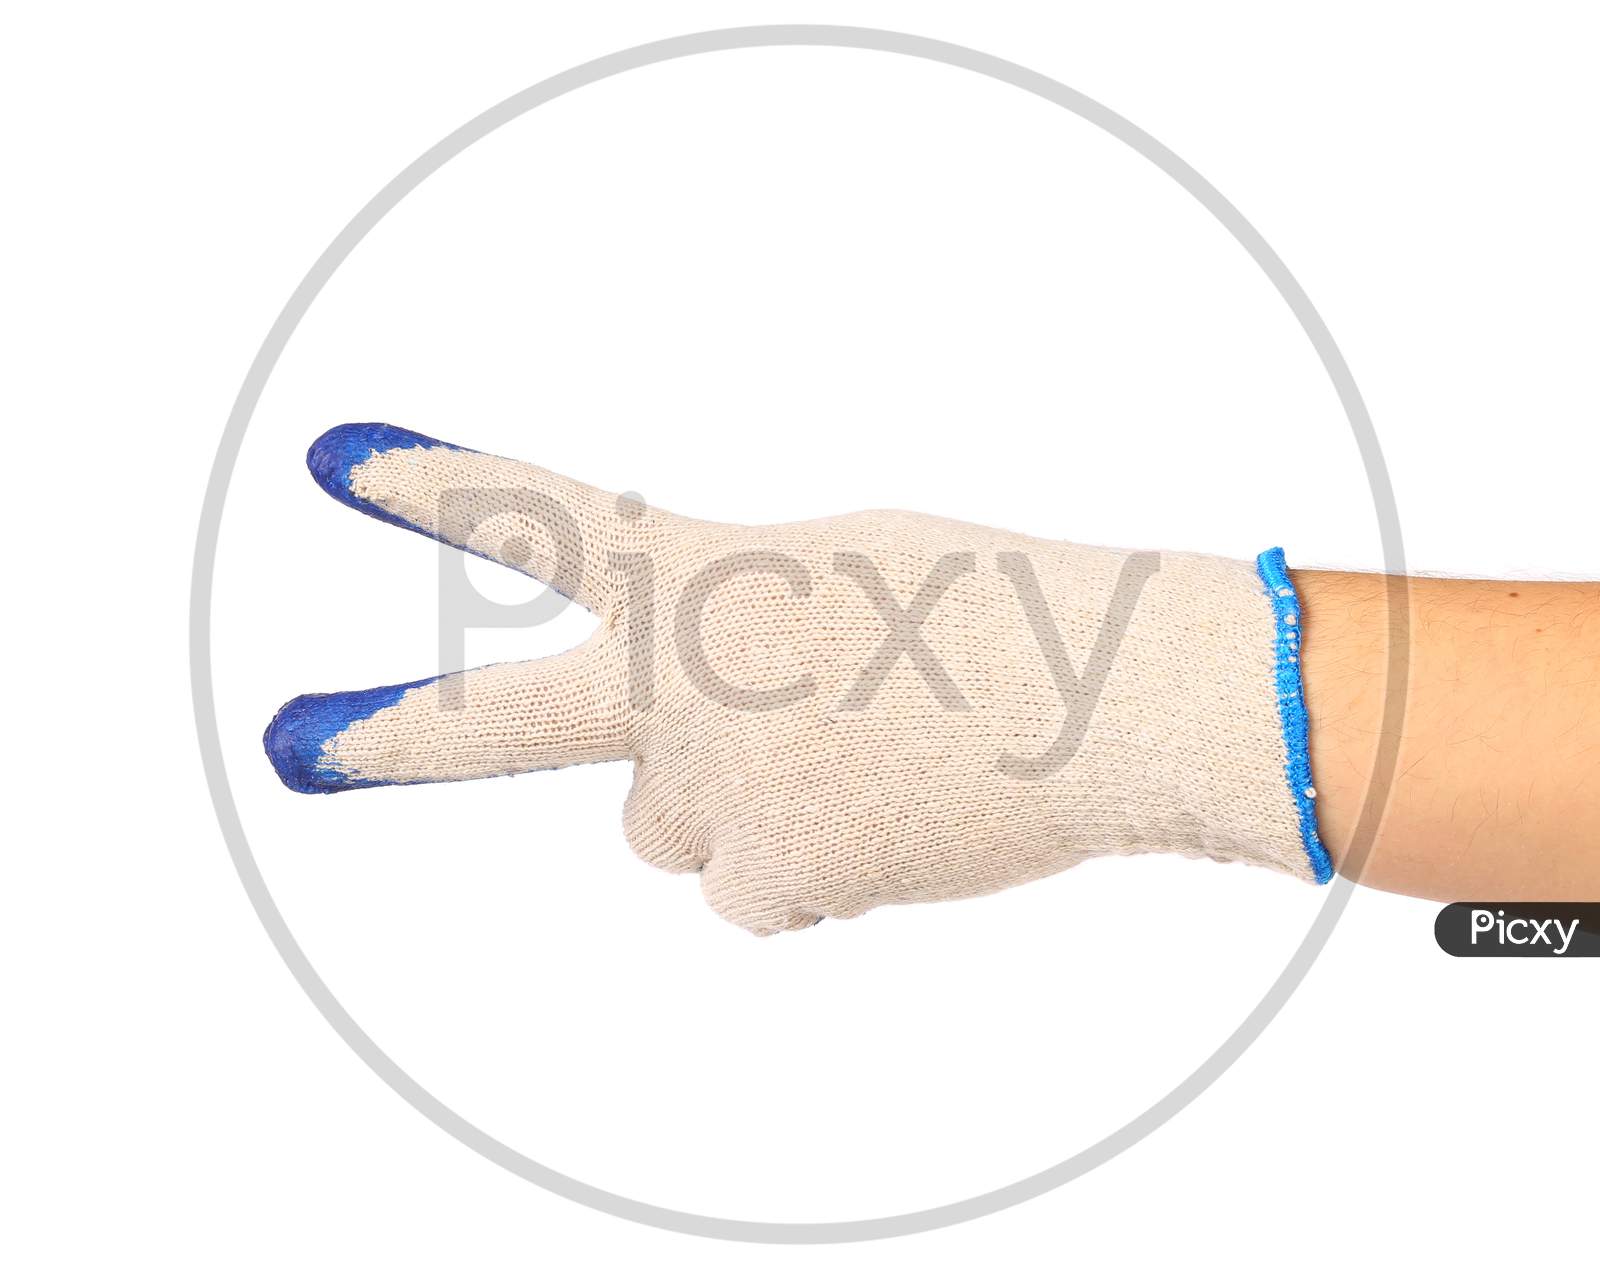 Hand Shows Two In Rubber Protective Glove. Isolated On A White Background